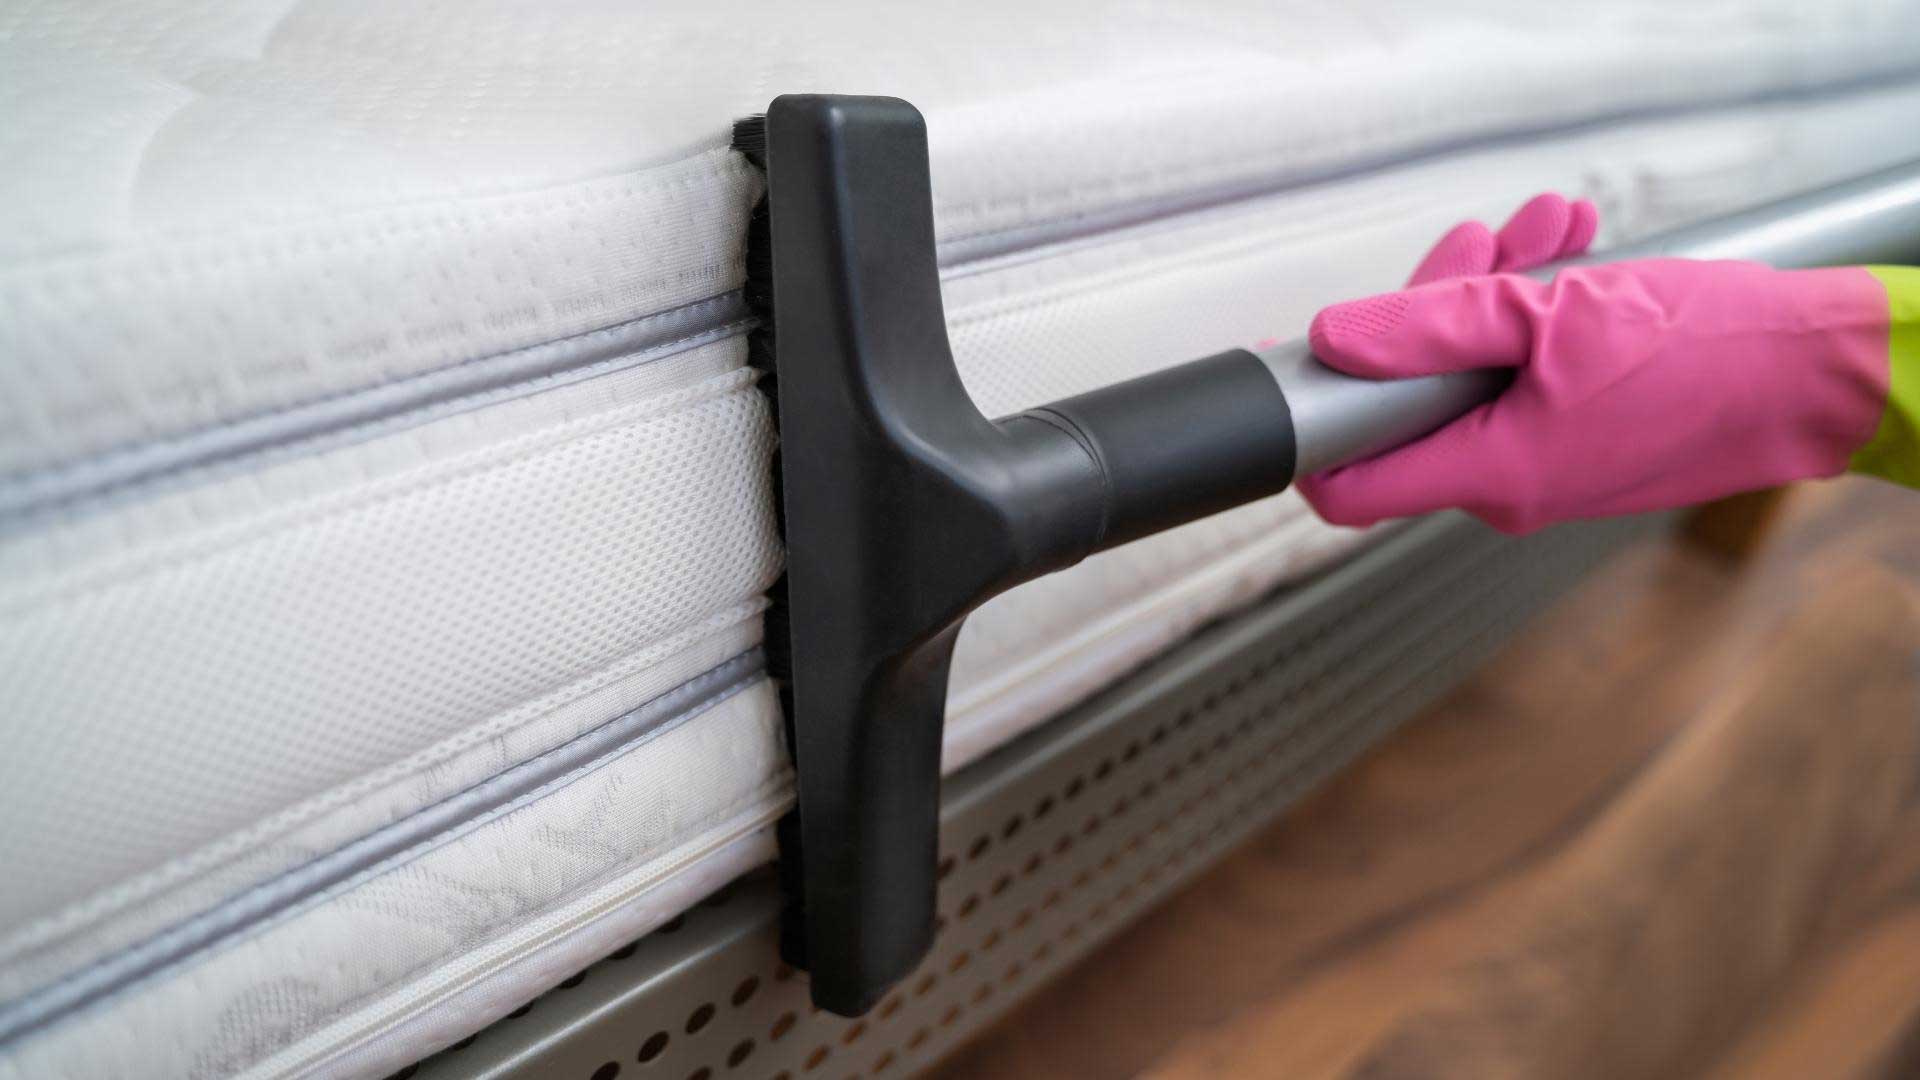 Step 1: Strip the Bedding
Remove all sheets, pillowcases, and other bedding from the mattress.

Step 2: Vacuum the Mattress
Use a vacuum cleaner with an upholstery attachment to remove any loose dirt, dust, and debris from the mattress surface. Pay special attention to the seams and edges of the mattress, where dust and dirt can accumulate.

Step 3: Treat Stains
Spot clean any stains on the mattress using a stain remover specifically designed for mattresses or a mixture of baking soda, hydrogen peroxide, and dish soap.

Step 4: Sprinkle Baking Soda
Sprinkle a thin layer of baking soda over the entire surface of the mattress. Baking soda is a natural deodorizer and will help absorb any odors.

Step 5: Let Baking Soda Sit
Leave the baking soda on the mattress for at least an hour, or ideally overnight.

Step 6: Vacuum Again
Use the vacuum cleaner with the upholstery attachment to remove all of the baking soda from the mattress.

Step 7: Air Dry
Allow the mattress to air dry completely before replacing the bedding. If possible, open windows and use a fan to help speed up the drying process.

Following these 7 steps will help you effectively clean your mattress and keep it fresh and hygienic.